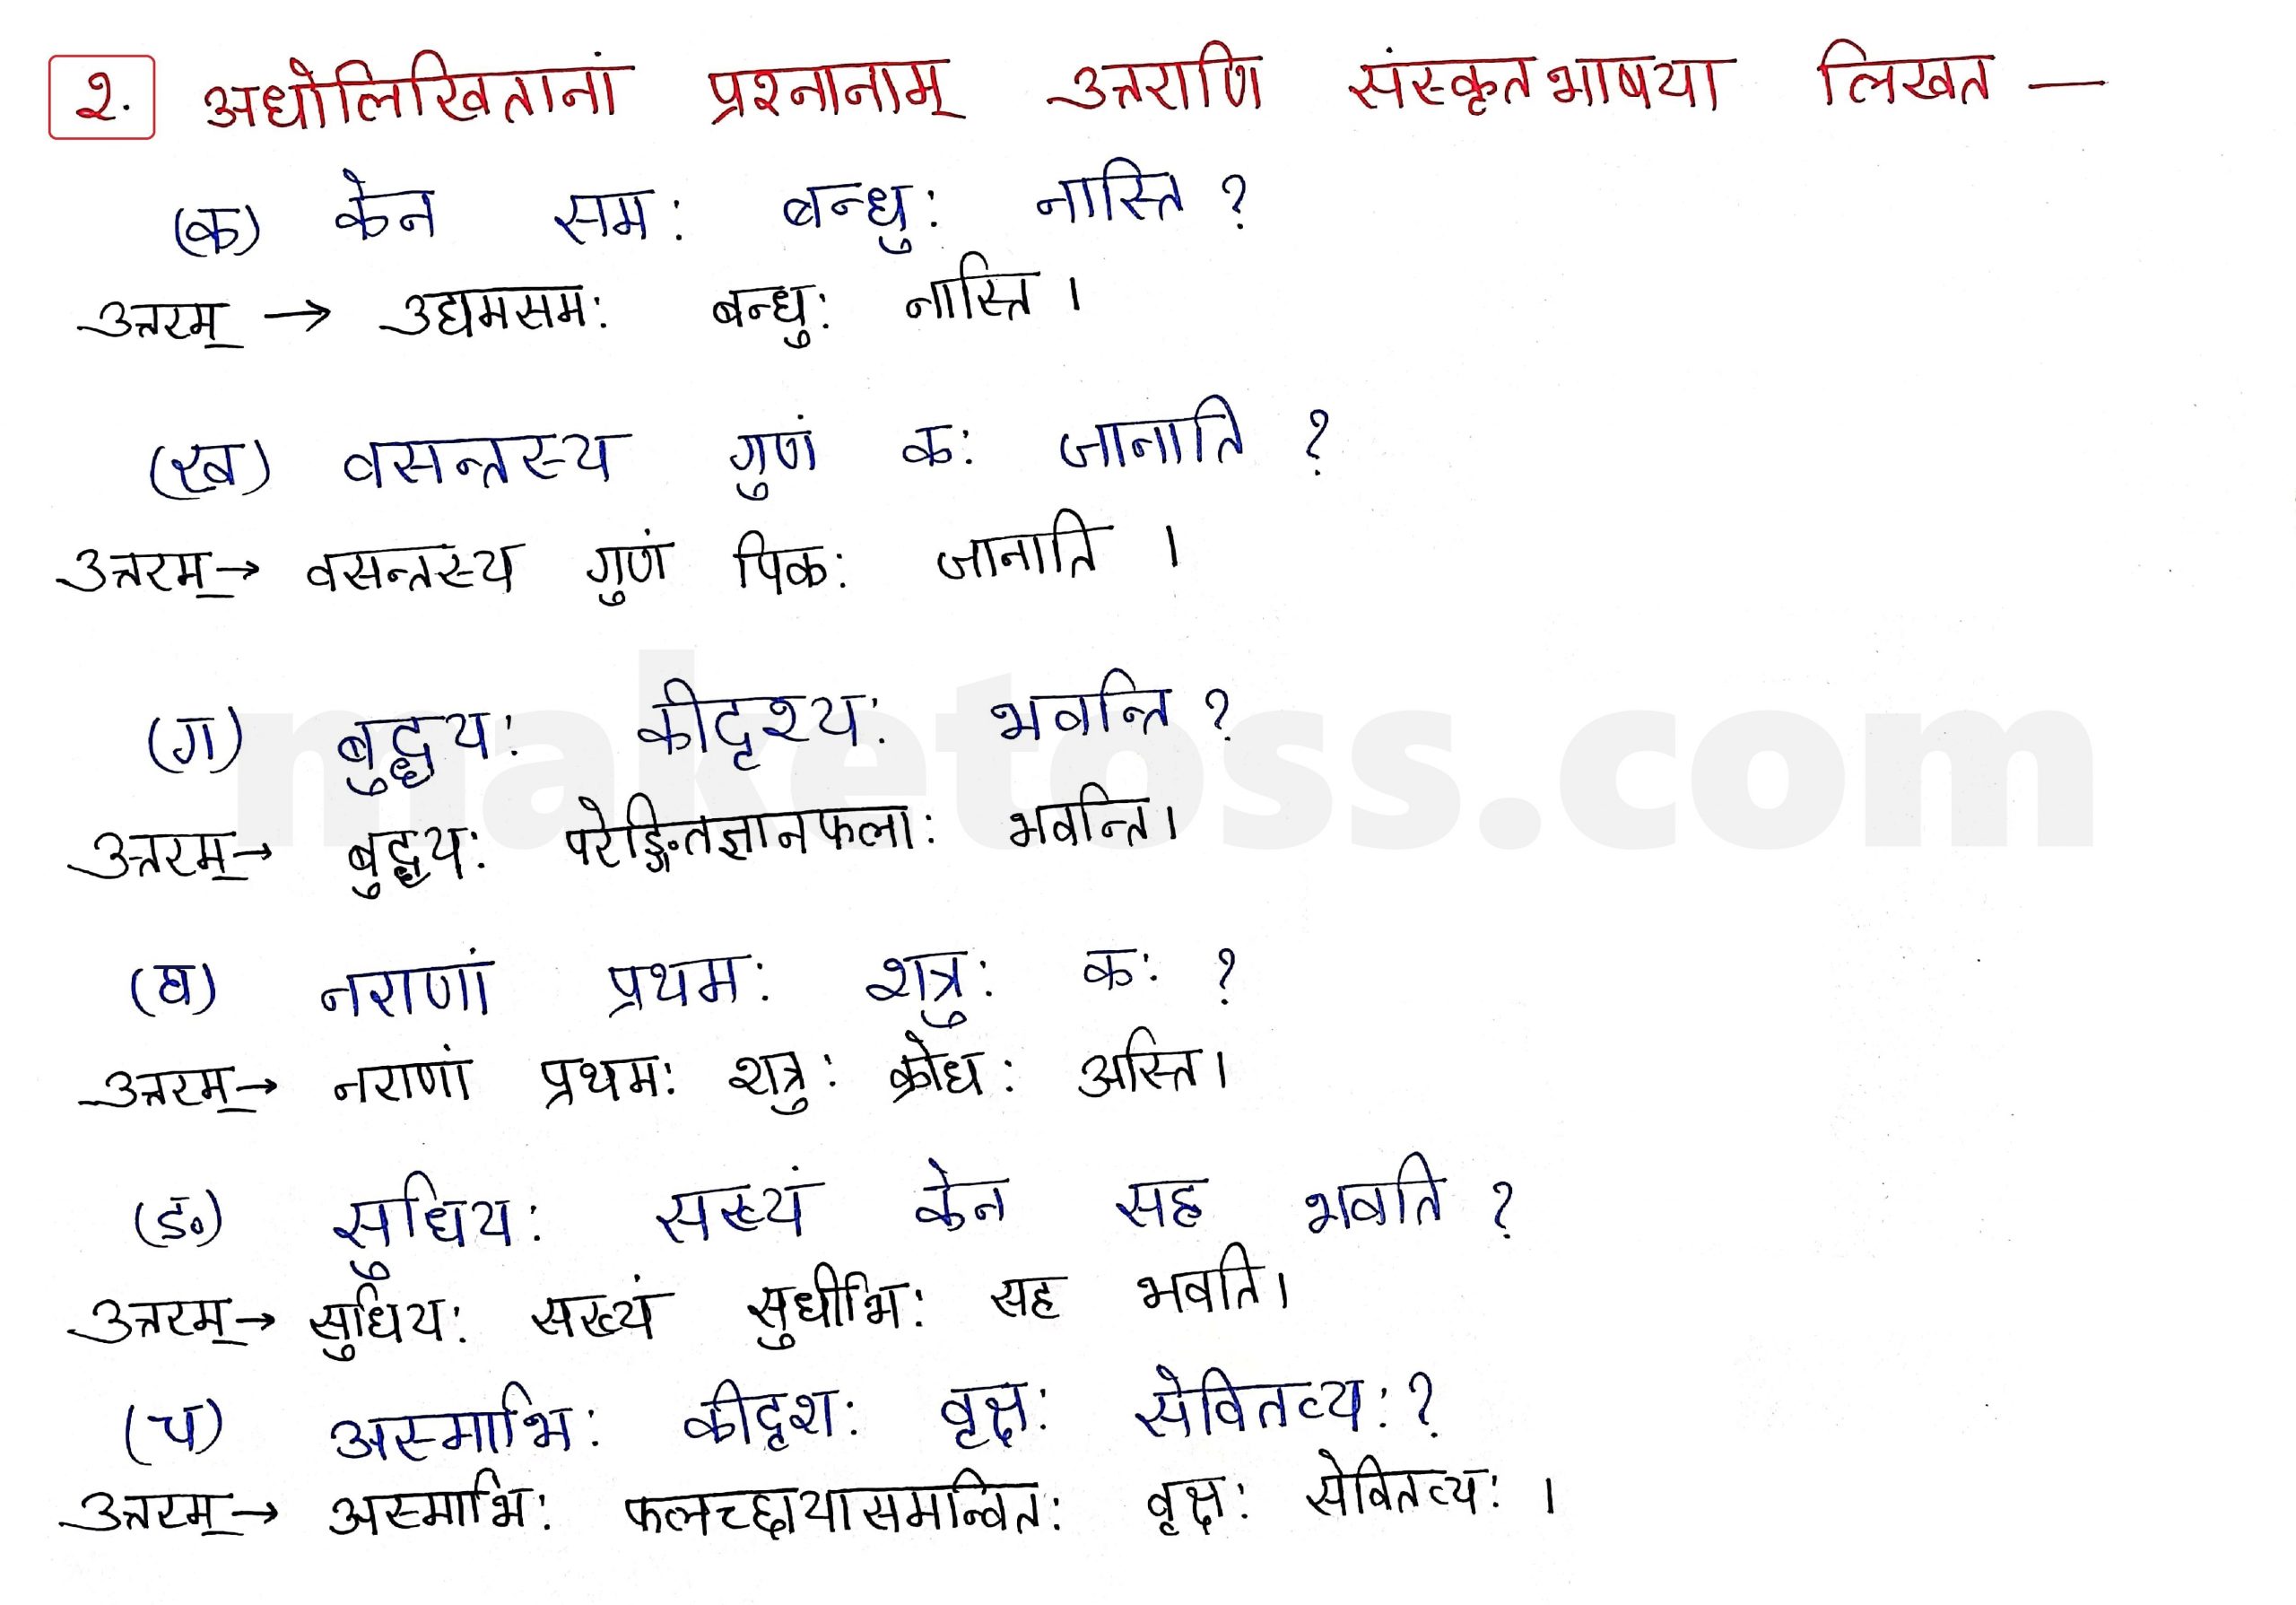 Sanskrit Class 10 - Chapter 6 - सुभाषितानि - Question 2 with Answer